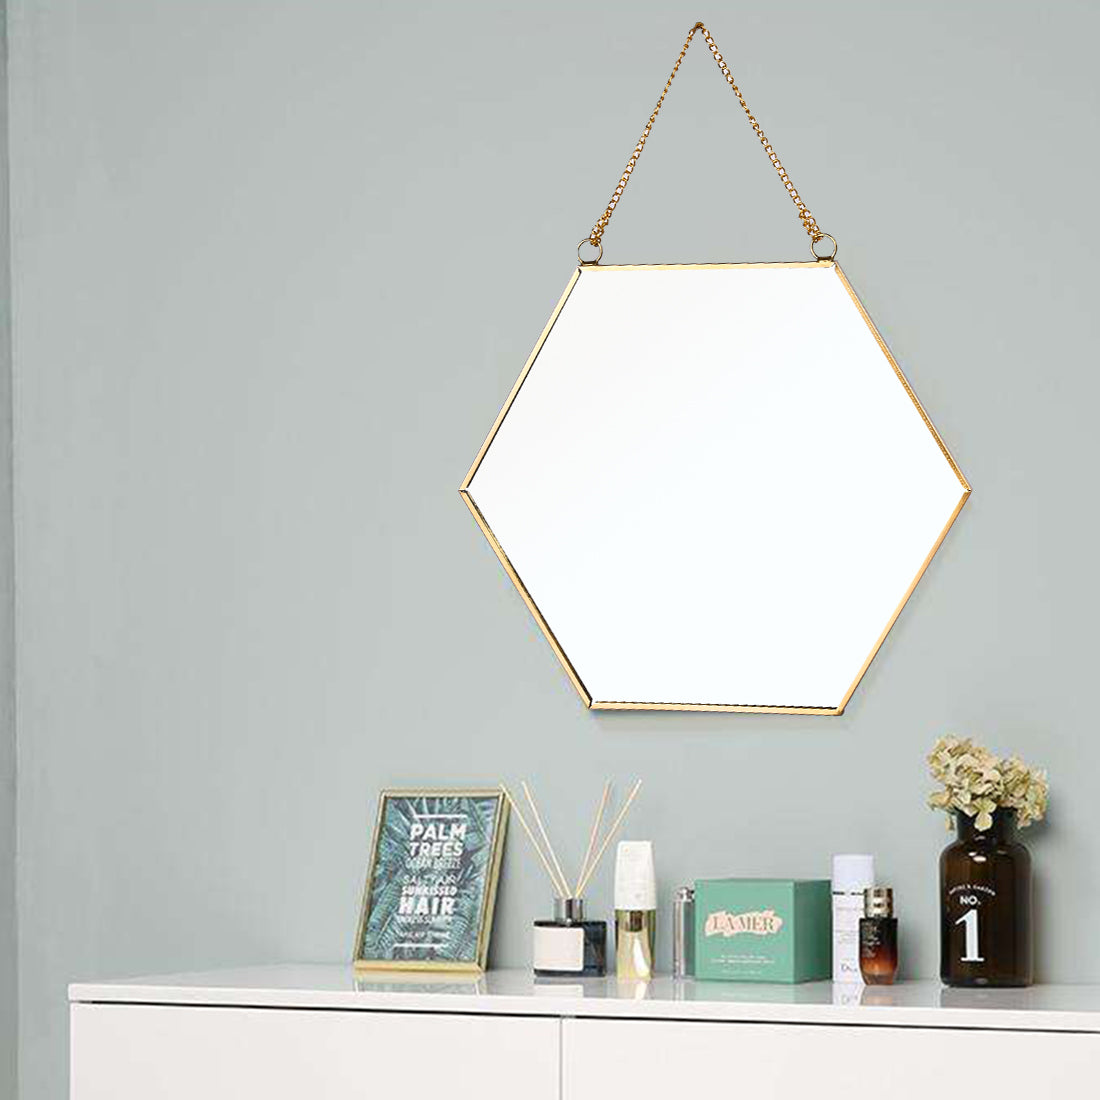 Decorative Hanging Wall Hexagon Mirror Decor with Chain